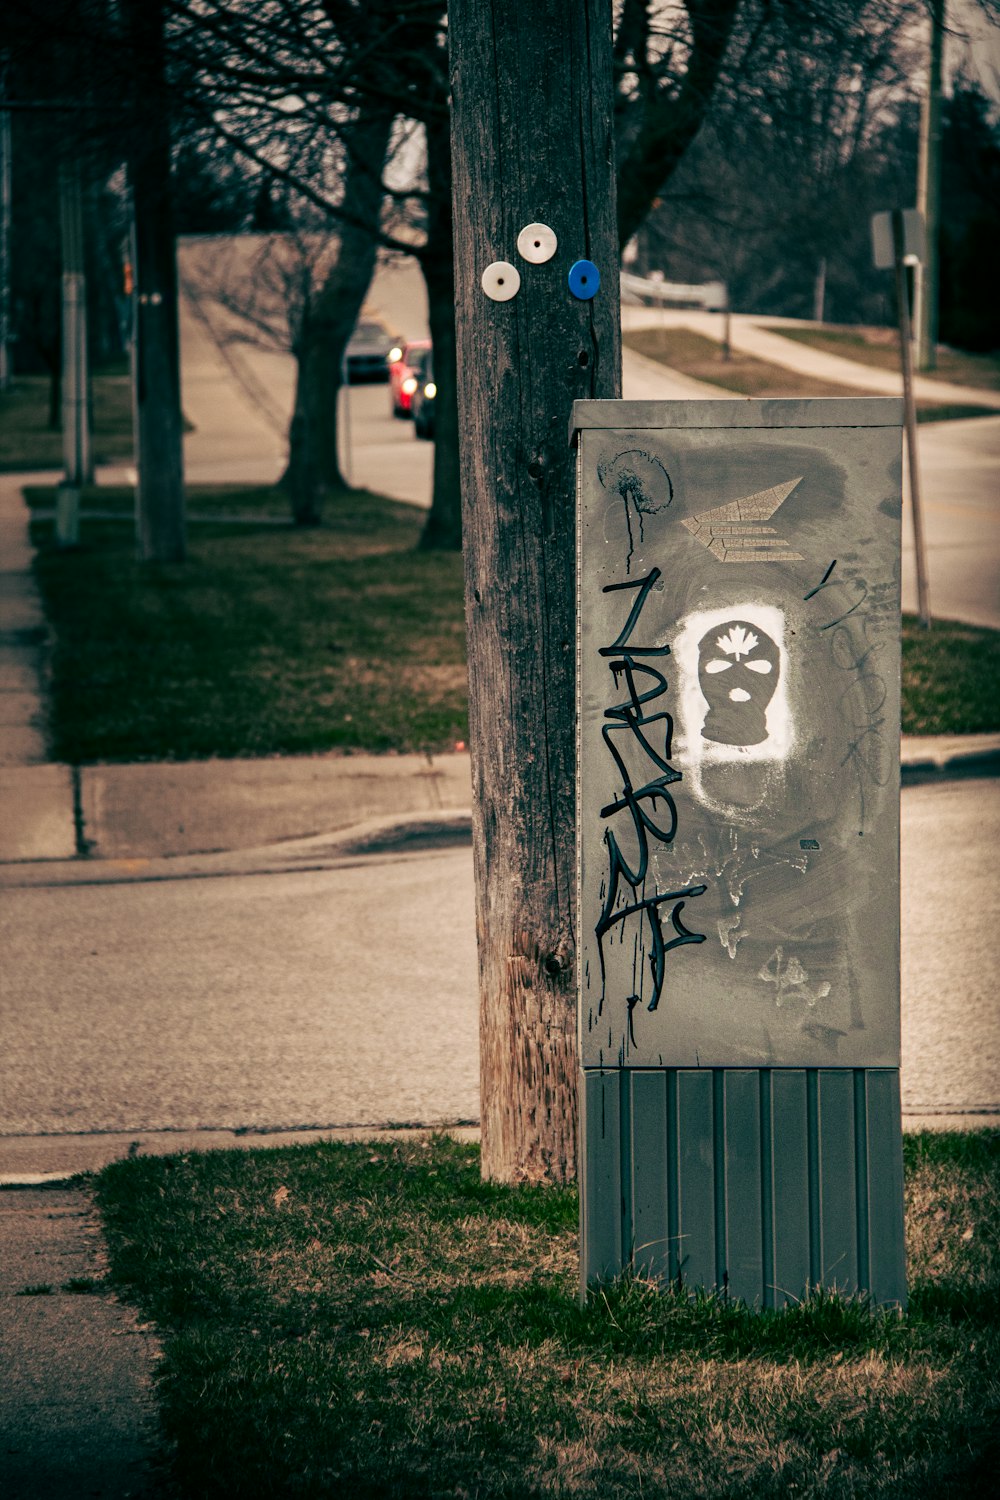 a pole with graffiti on it next to a street